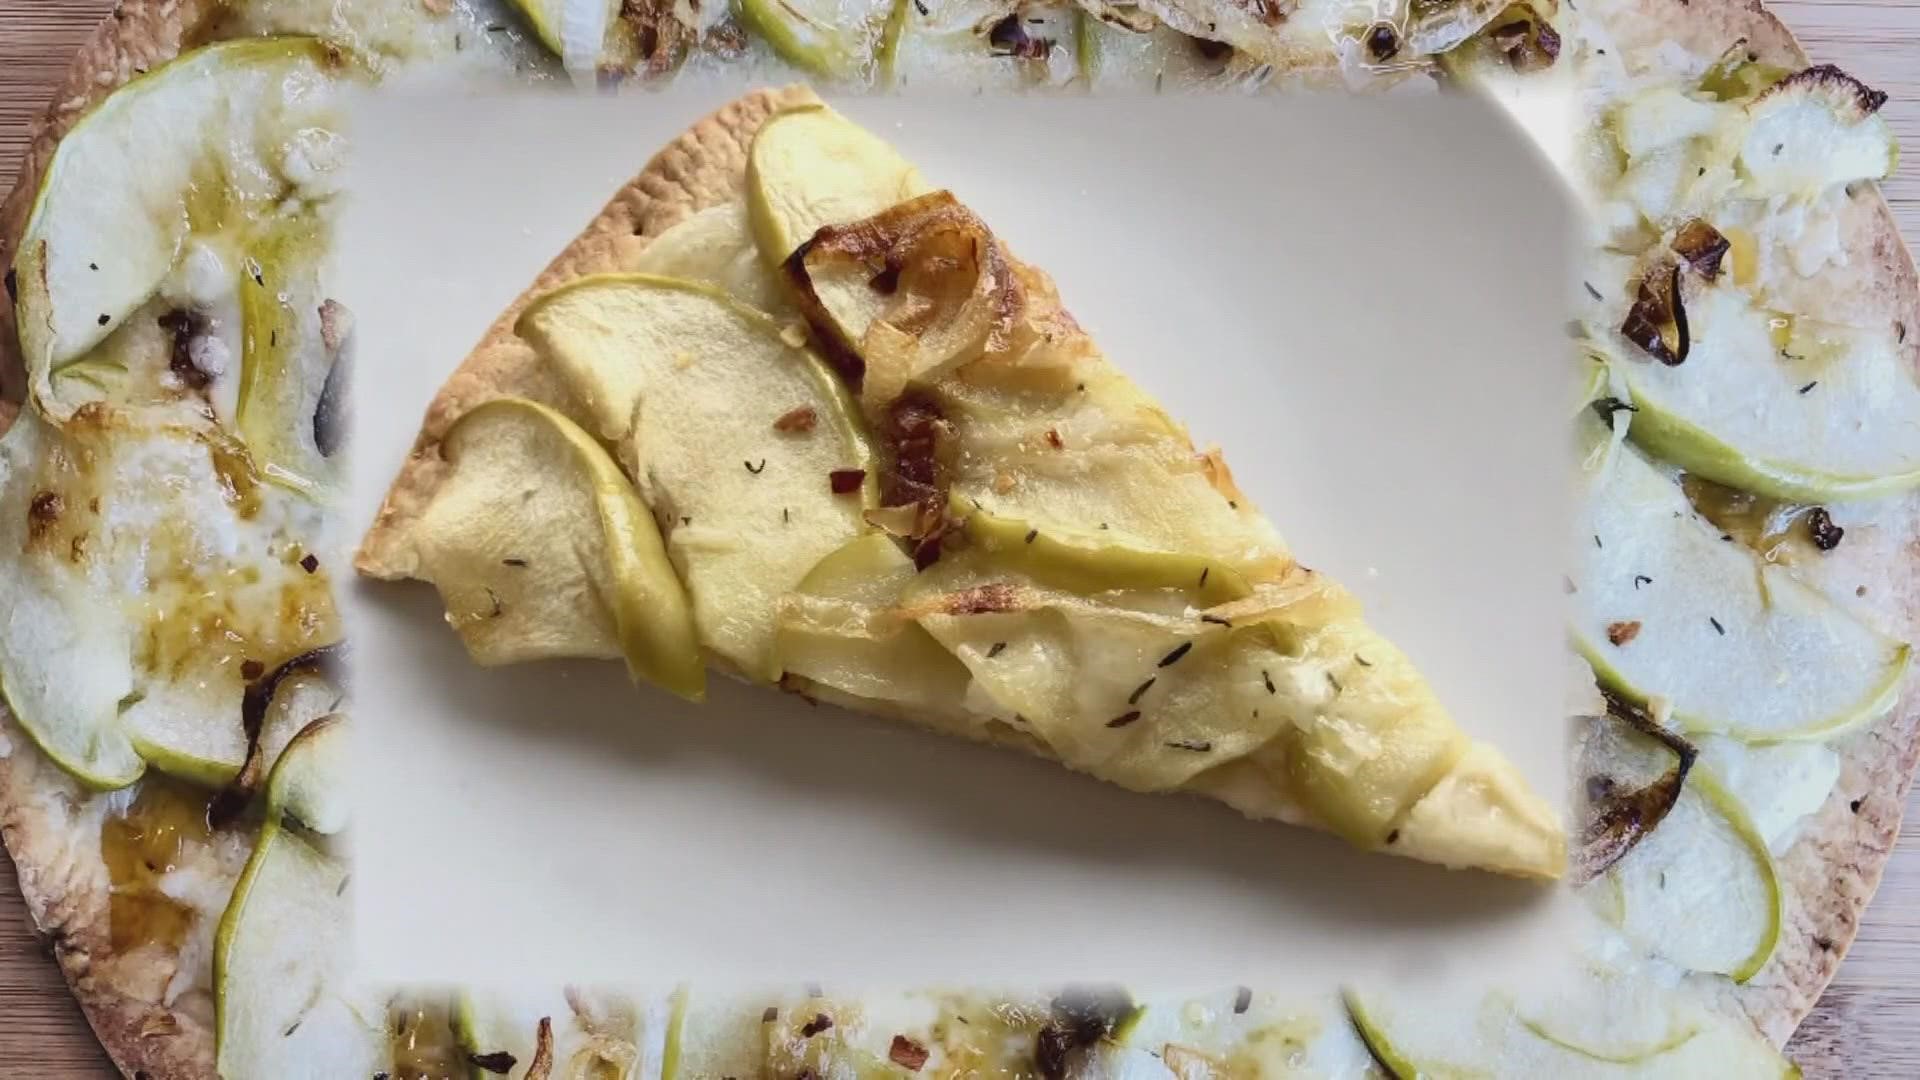 10TV's Brittany Bailey is dishing up some unusual, but tasty flavors with this pizza recipe.